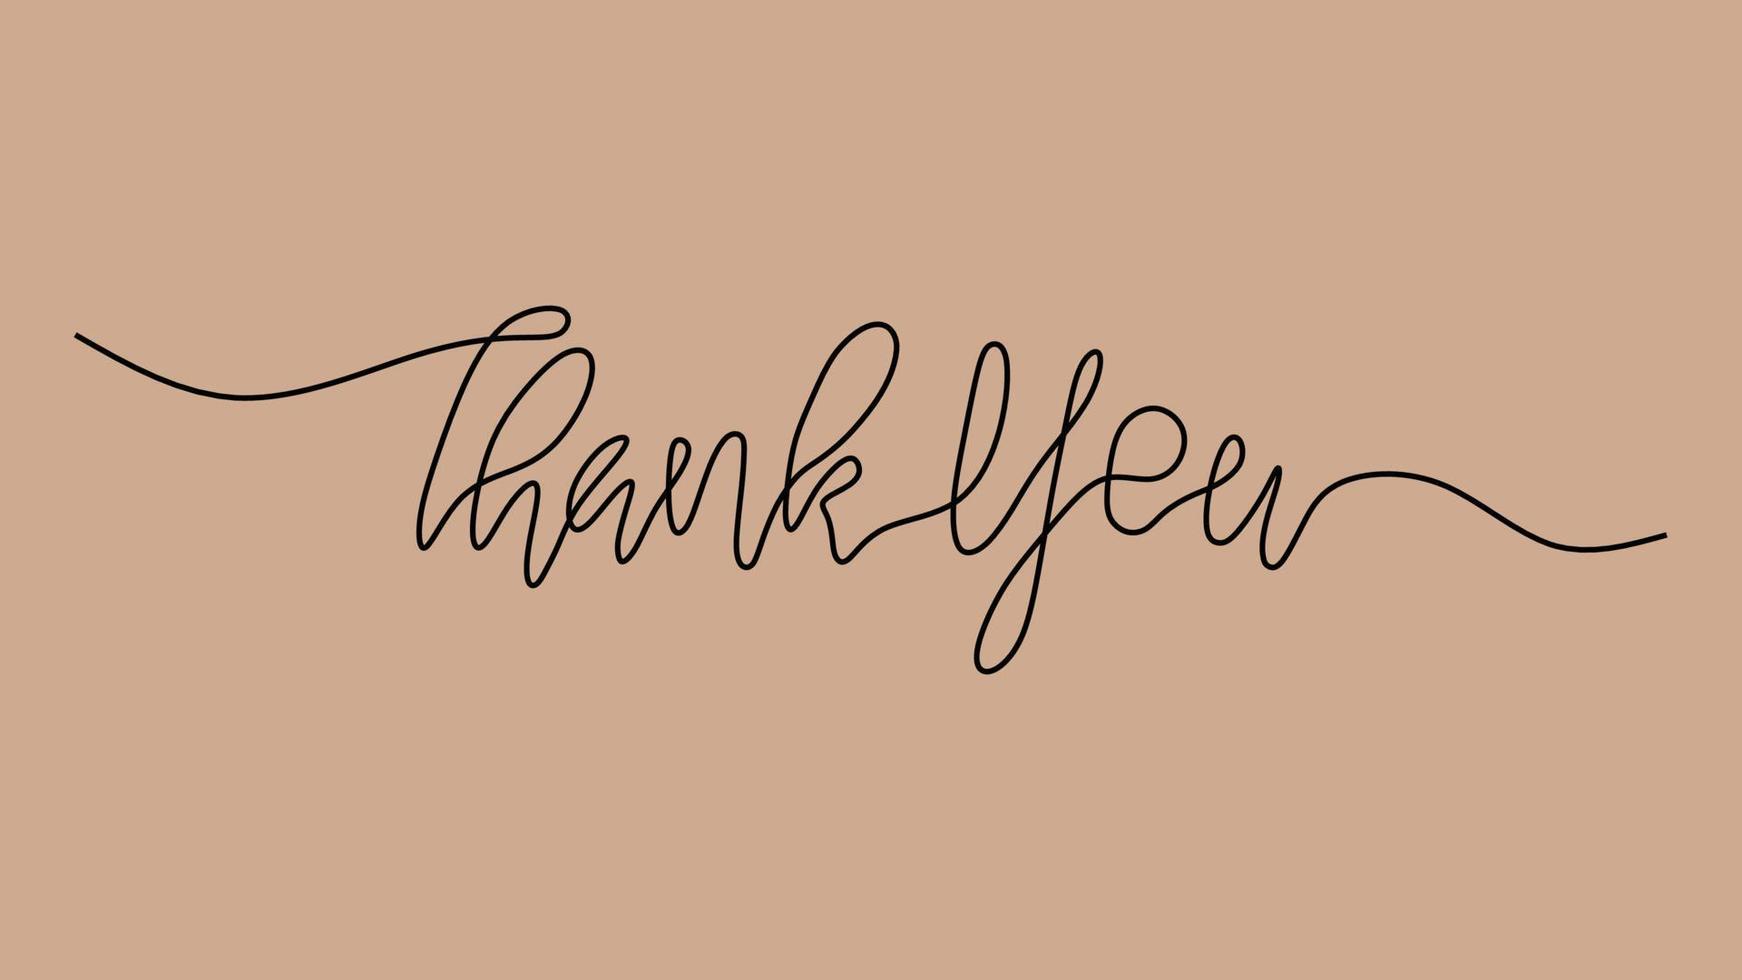 Thank you word text oneline continuous editable line art vector